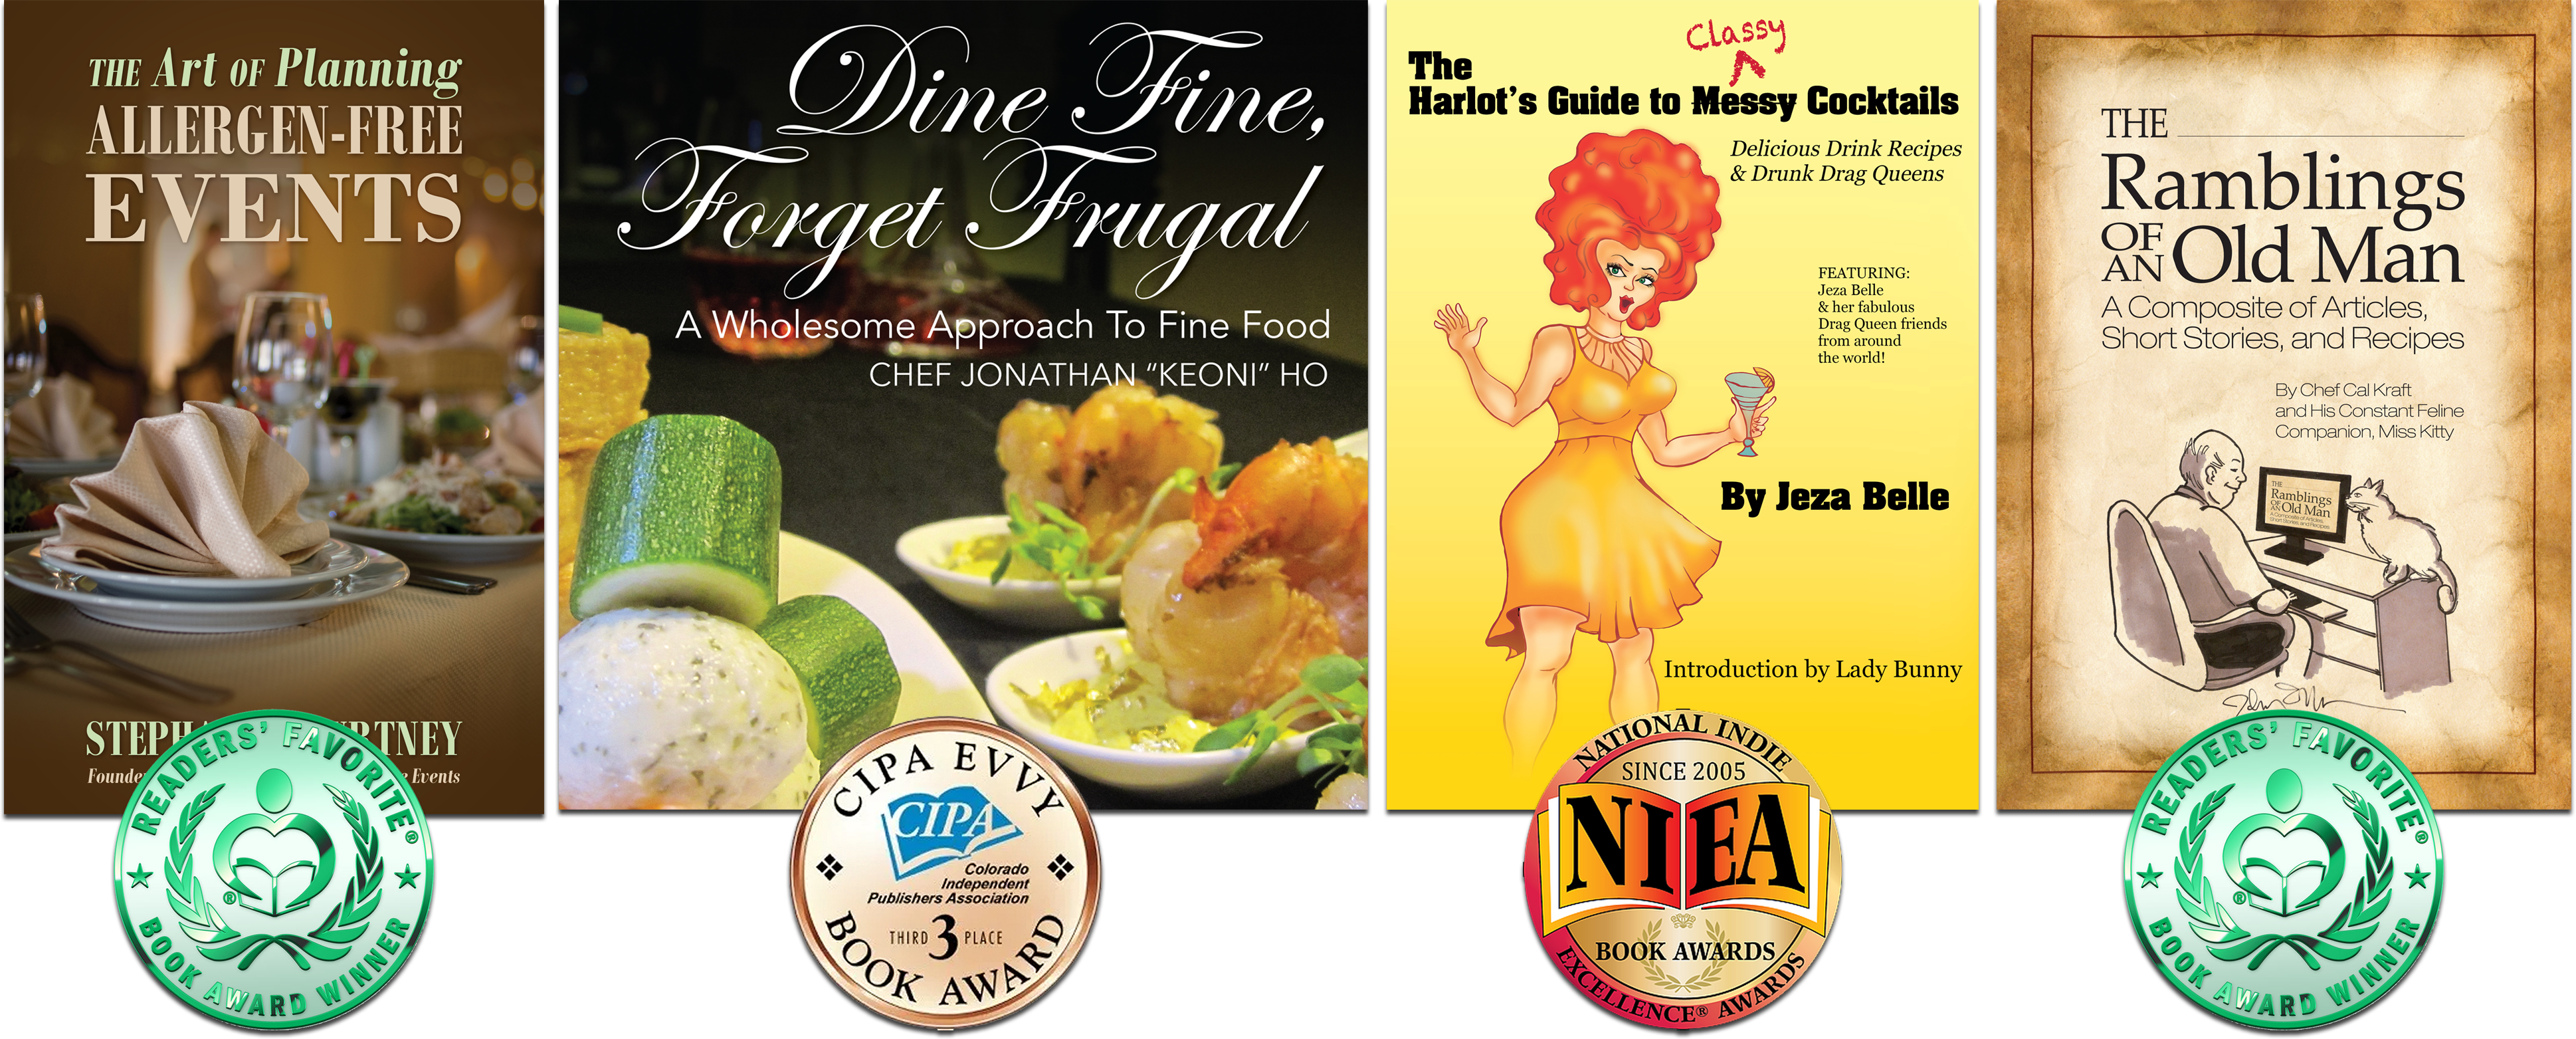 Award-winning, self-published cookbooks by Outskirts Press independent authors and writers published by Outskirts Press, one of the best self-publishing companies in the industry.